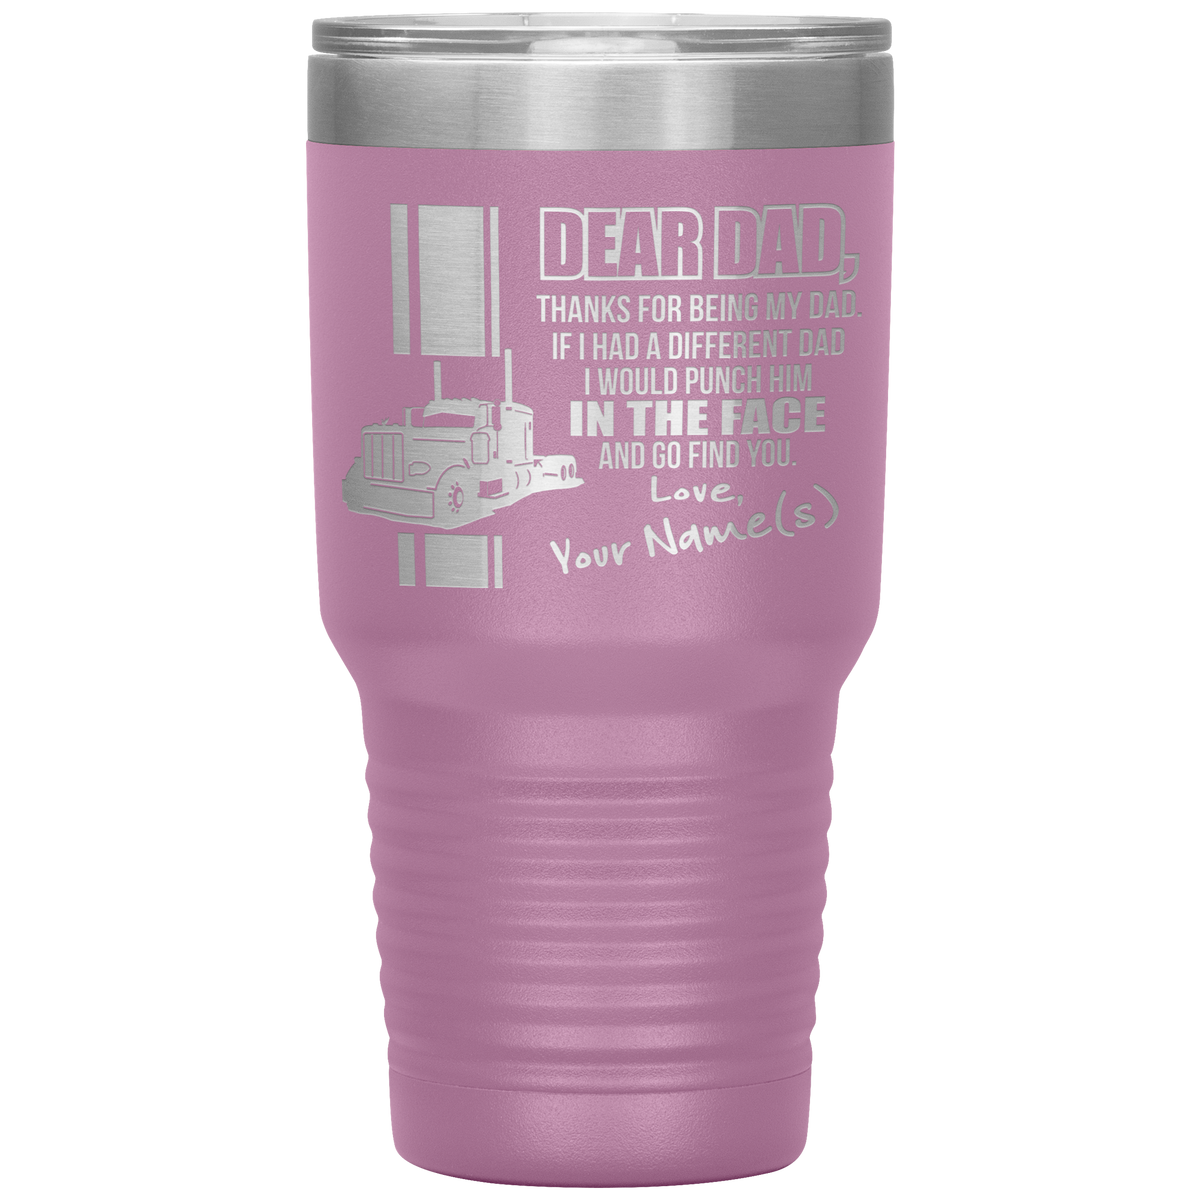 Dear Dad Pete Your Name(s) 30oz Tumbler Free Shipping